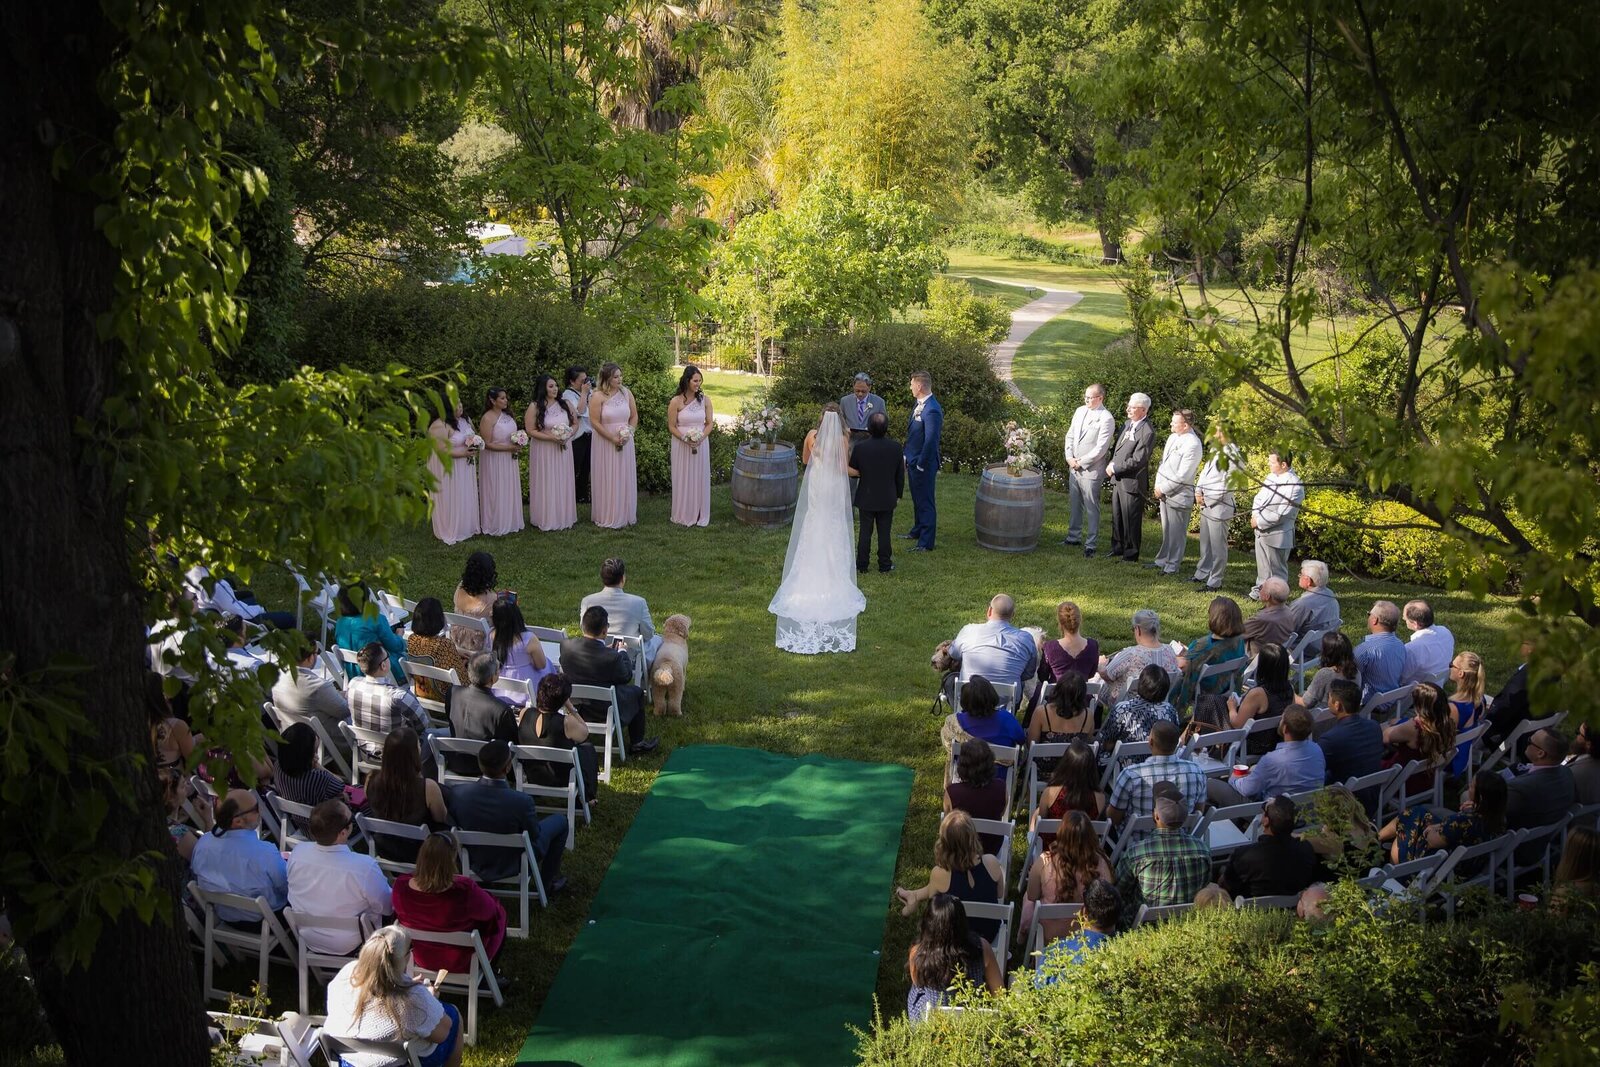 Sacramento wedding photography studio captures wedding ceremony from a top view with guests looking on as bride approaches groom at the alter.